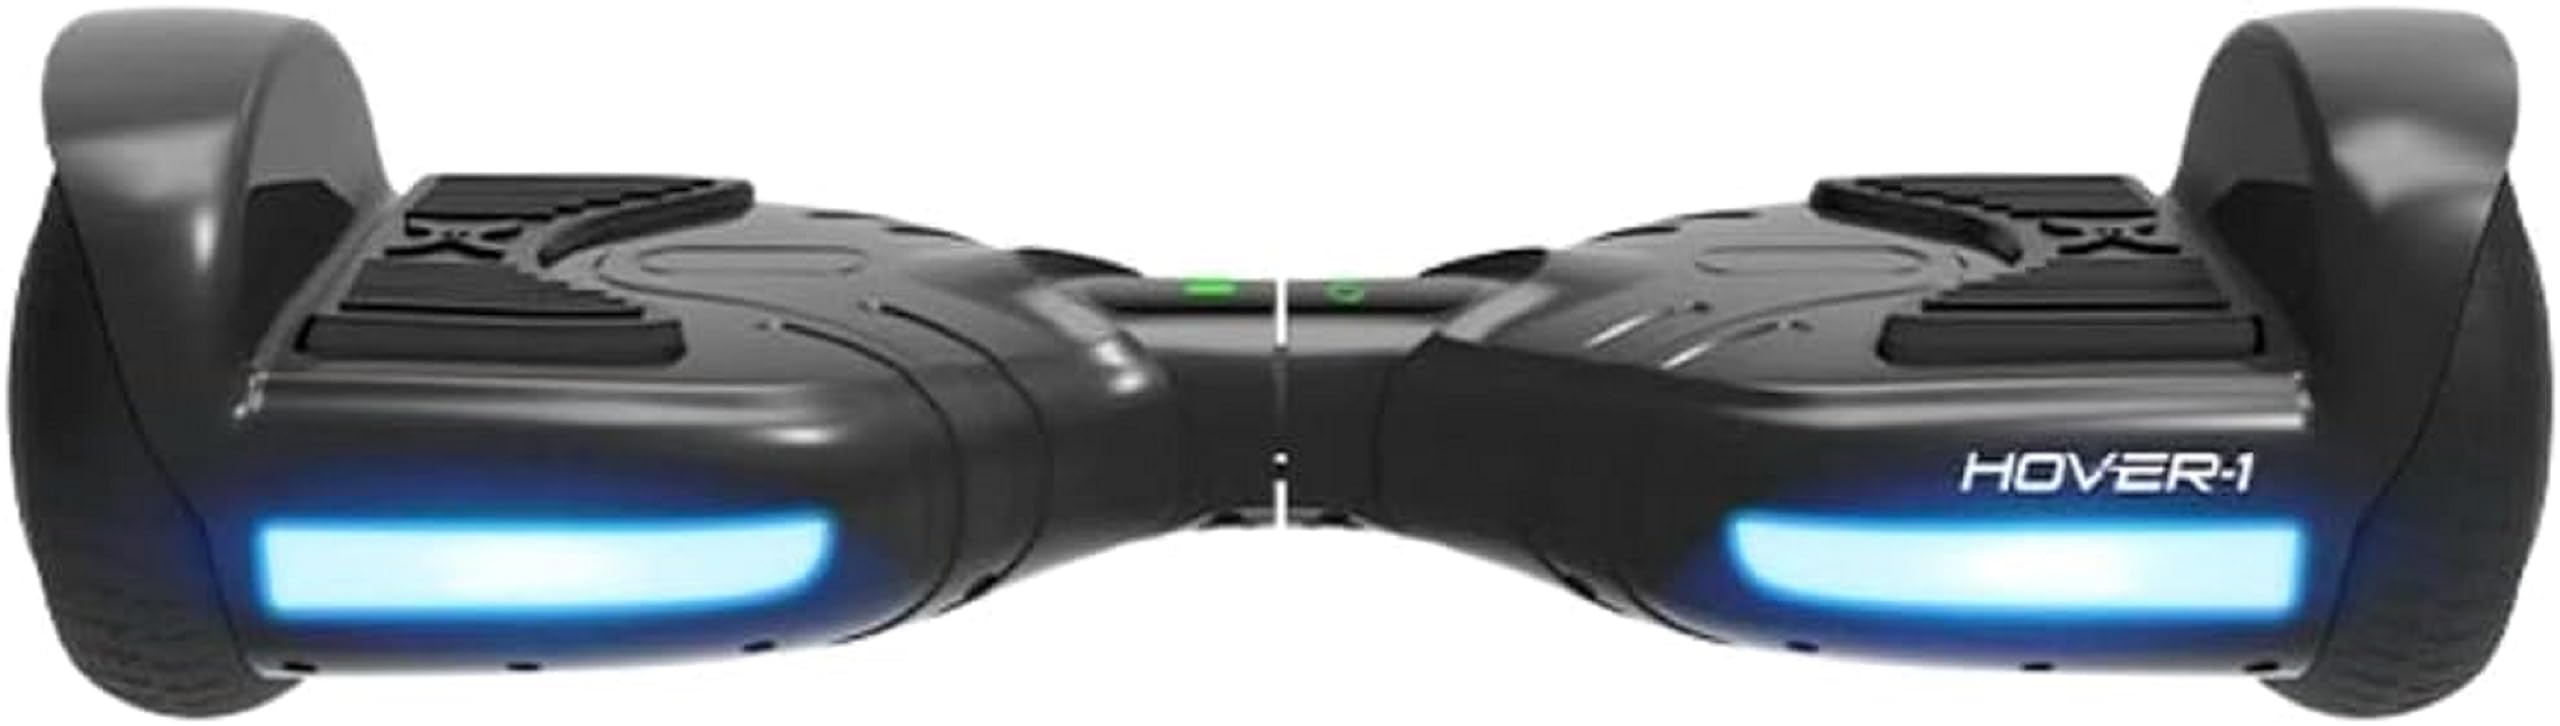 Hover-1 Blast Electric Self-Balancing Hoverboard w/ 6.5" Tires & Dual 160W Motors $53 + Free Shipping